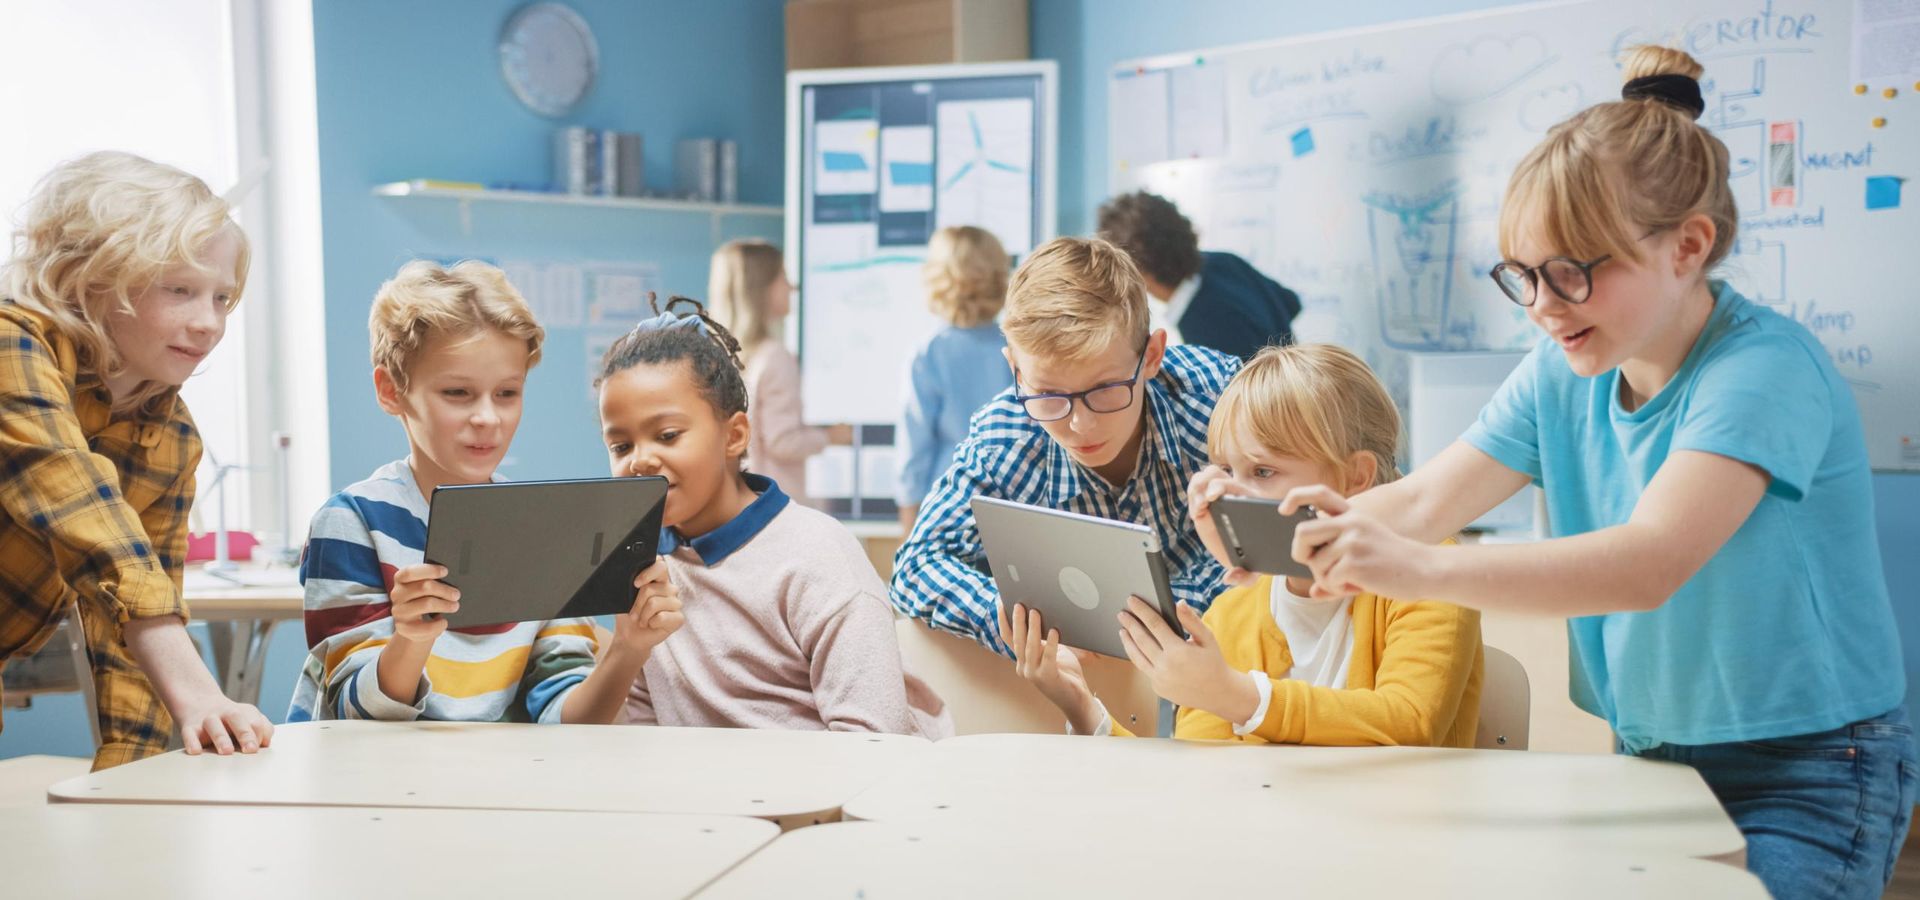 AI in education: 5 ways to reshape the learning experience